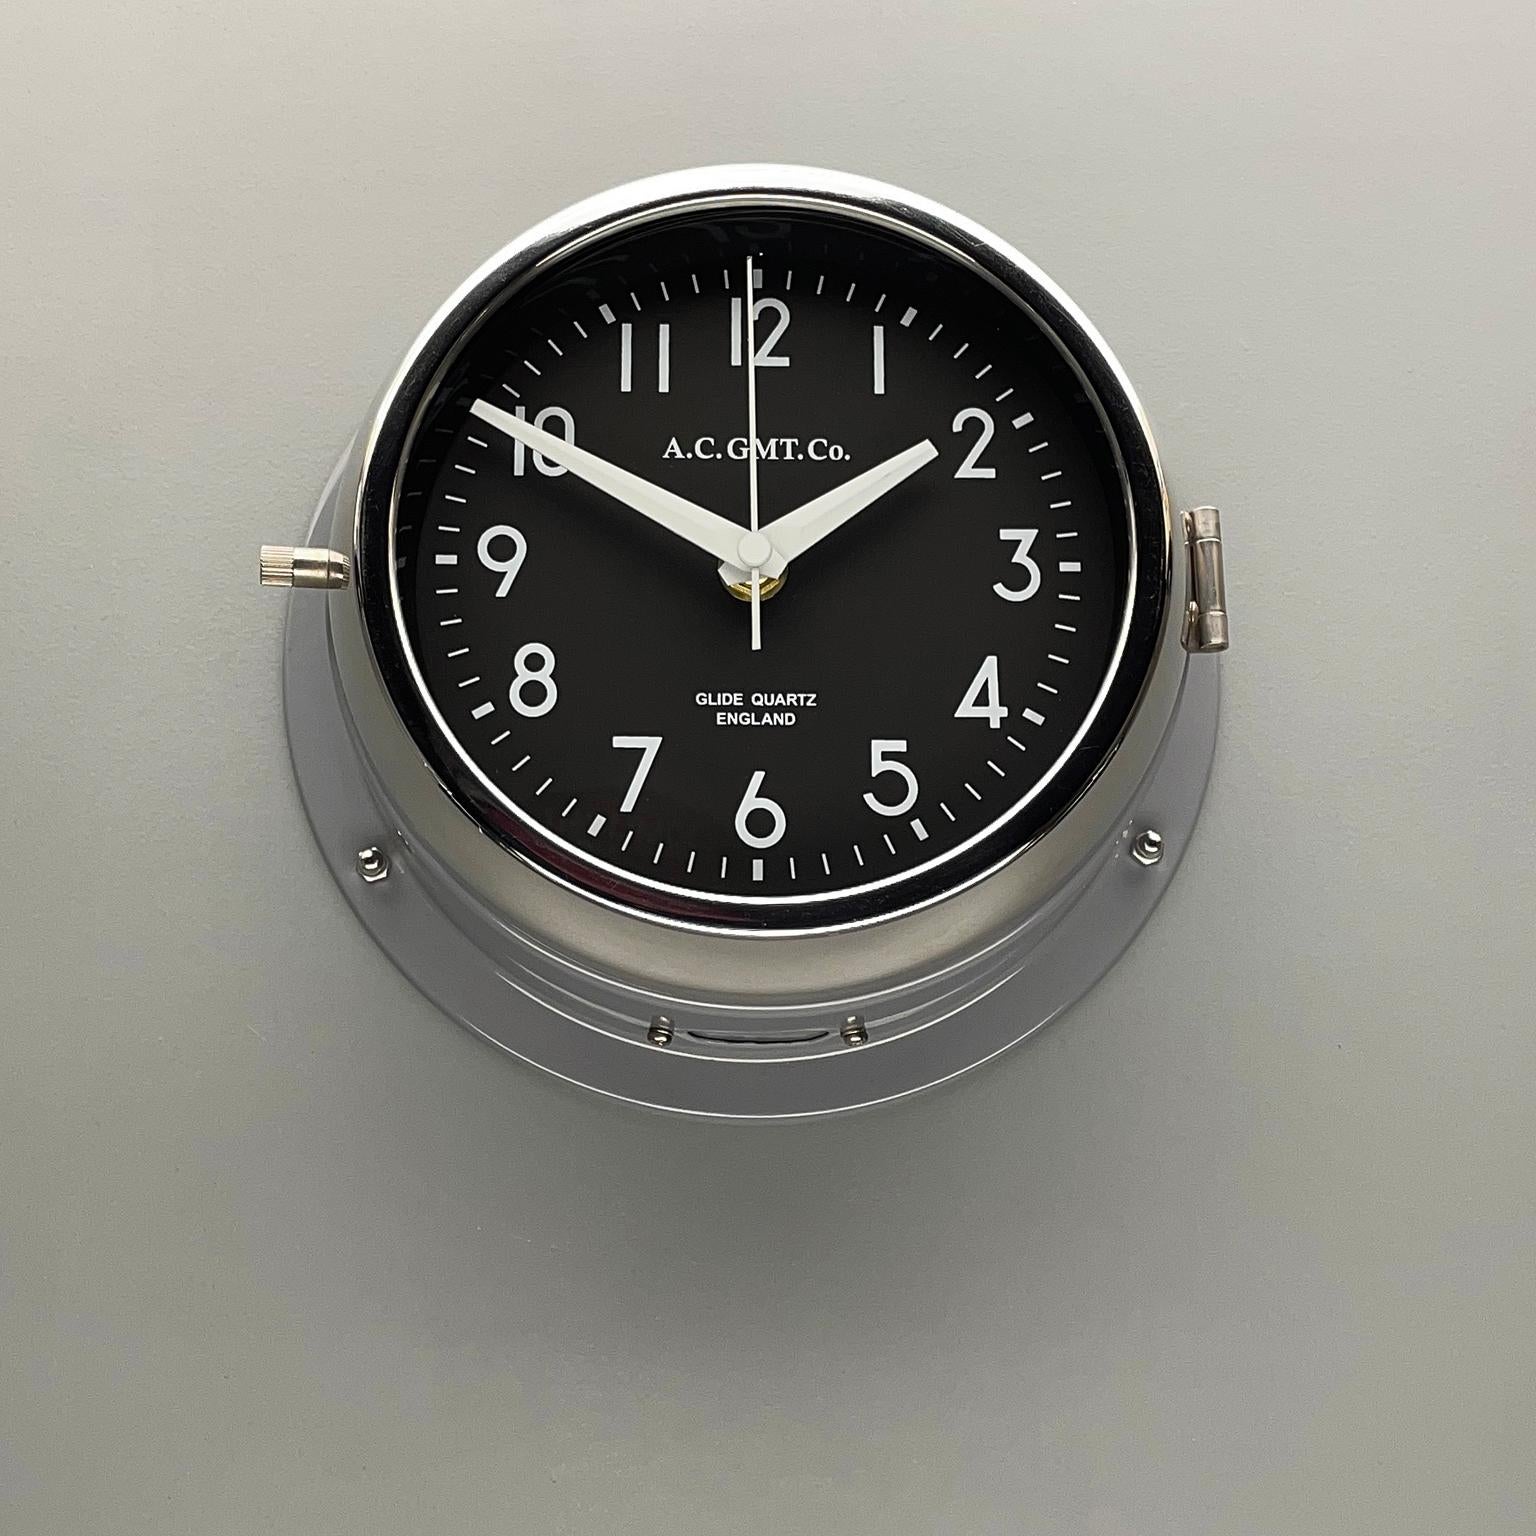 Quartz sweep seconds / non ticking wall clock finished in ultimate gray pantone 17-5104

Rescued from Industrial scrap yards and brought back to life in our UK workshop, our expert process allows us to create a high quality clock of luxury